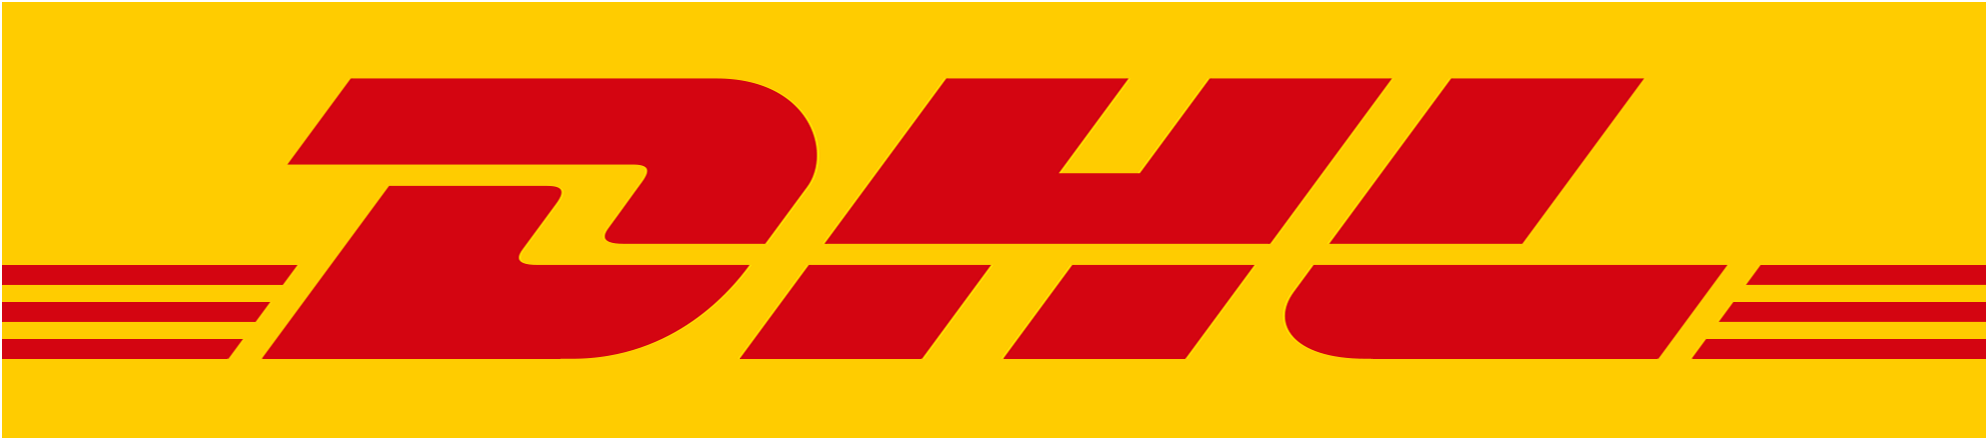 DHL Updated 2016